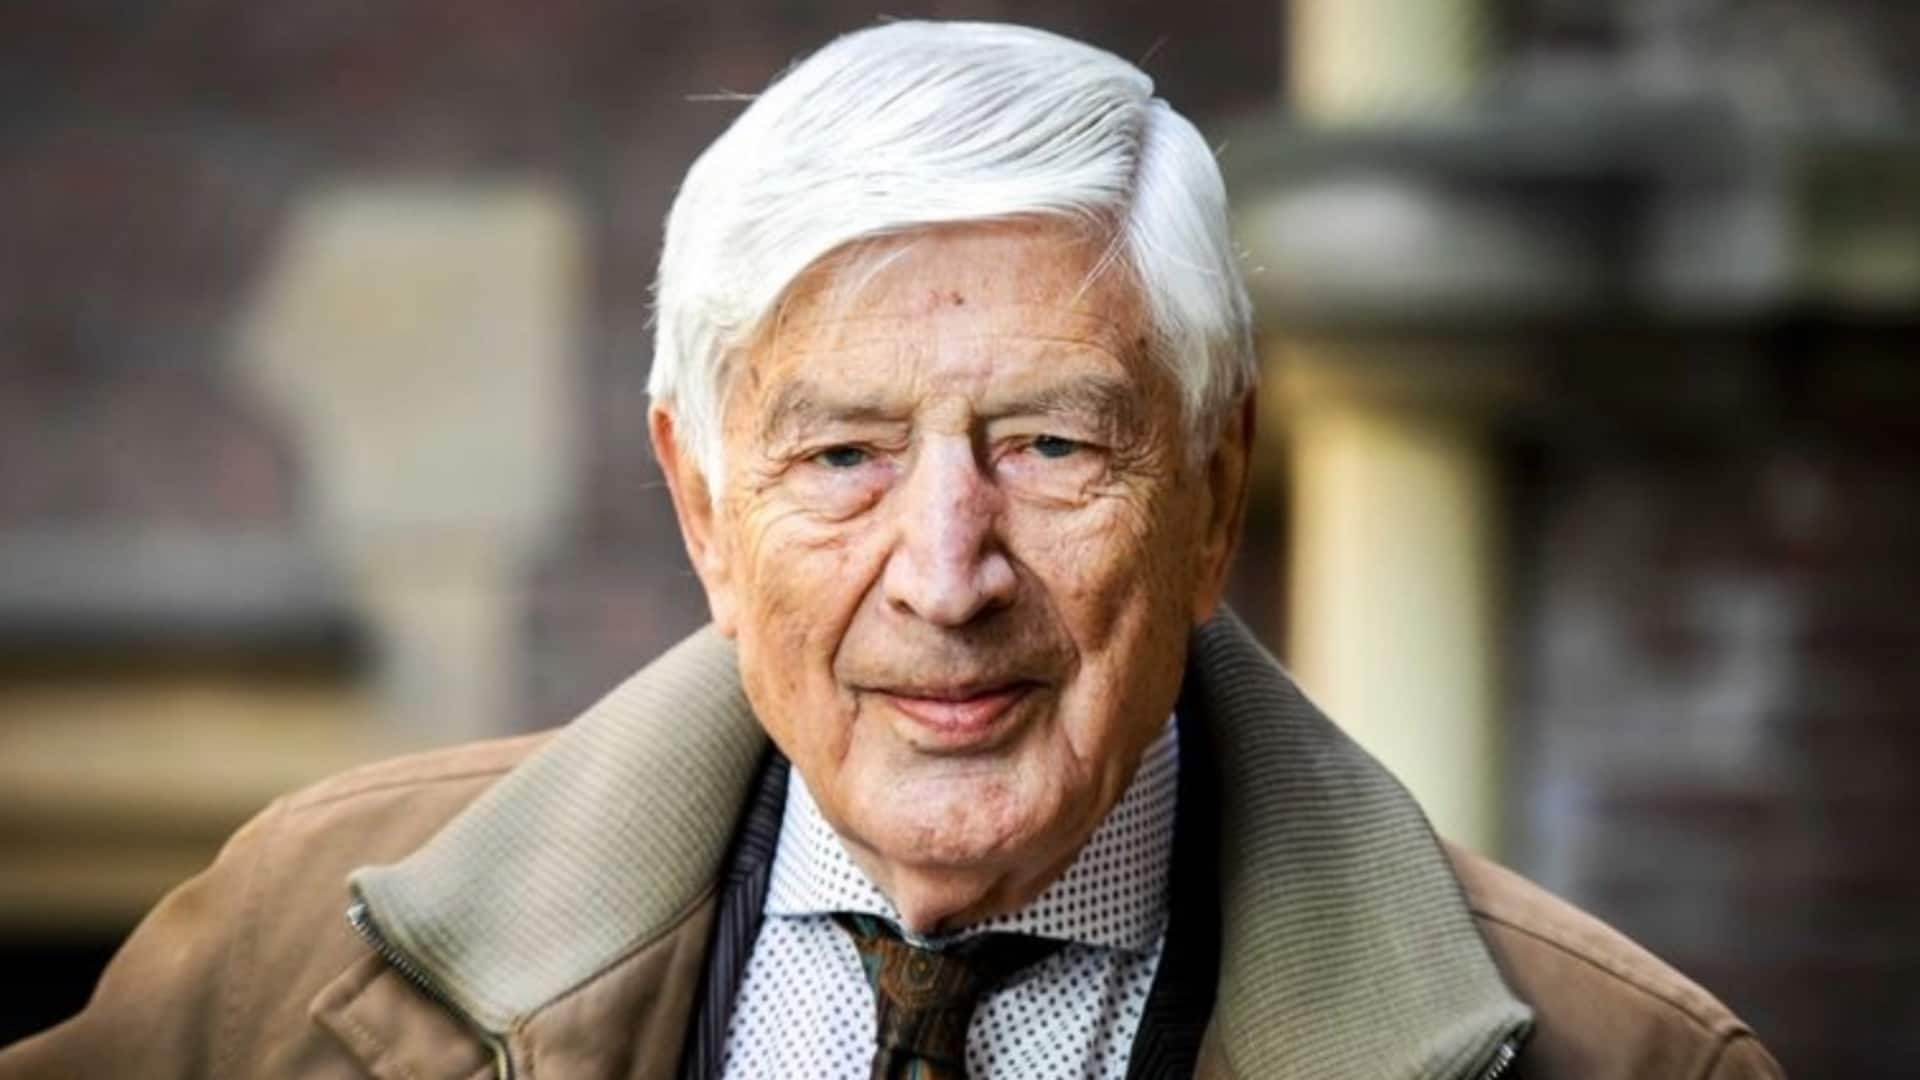 Ex-Dutch PM, wife die together by 'assisted suicide' at 93 